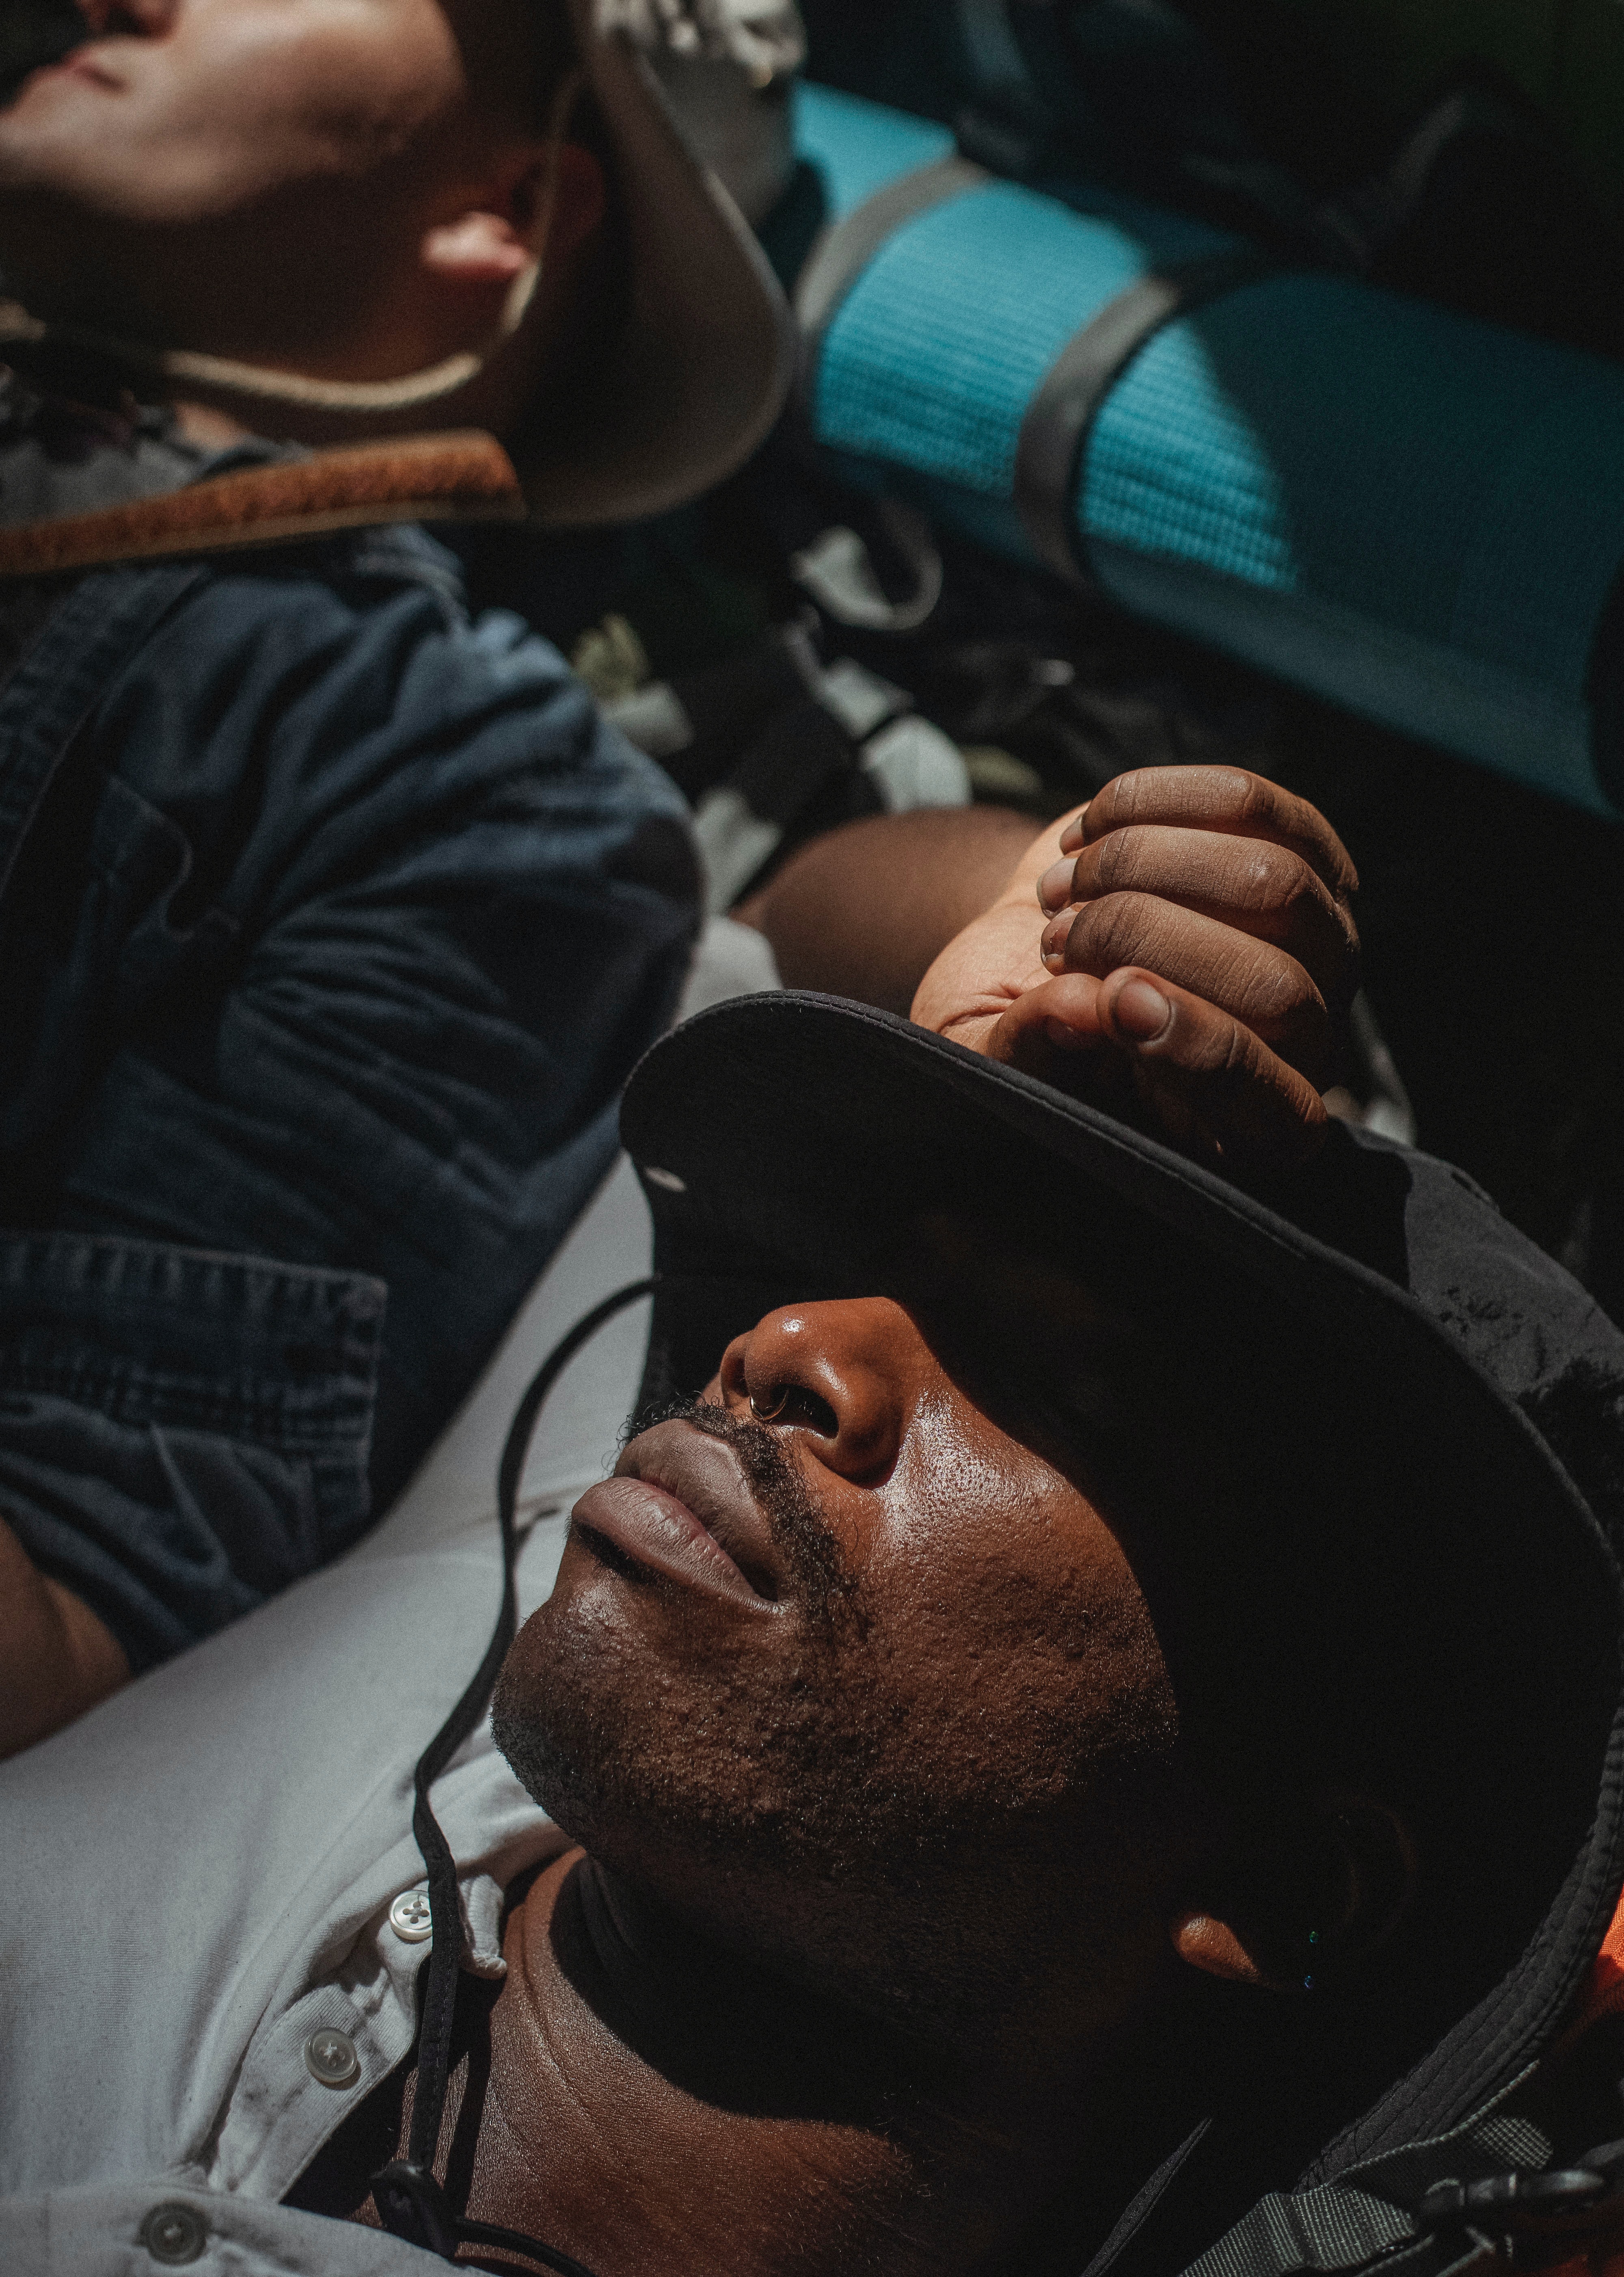 A man with a hat covering his eyes. | Source: Pexels